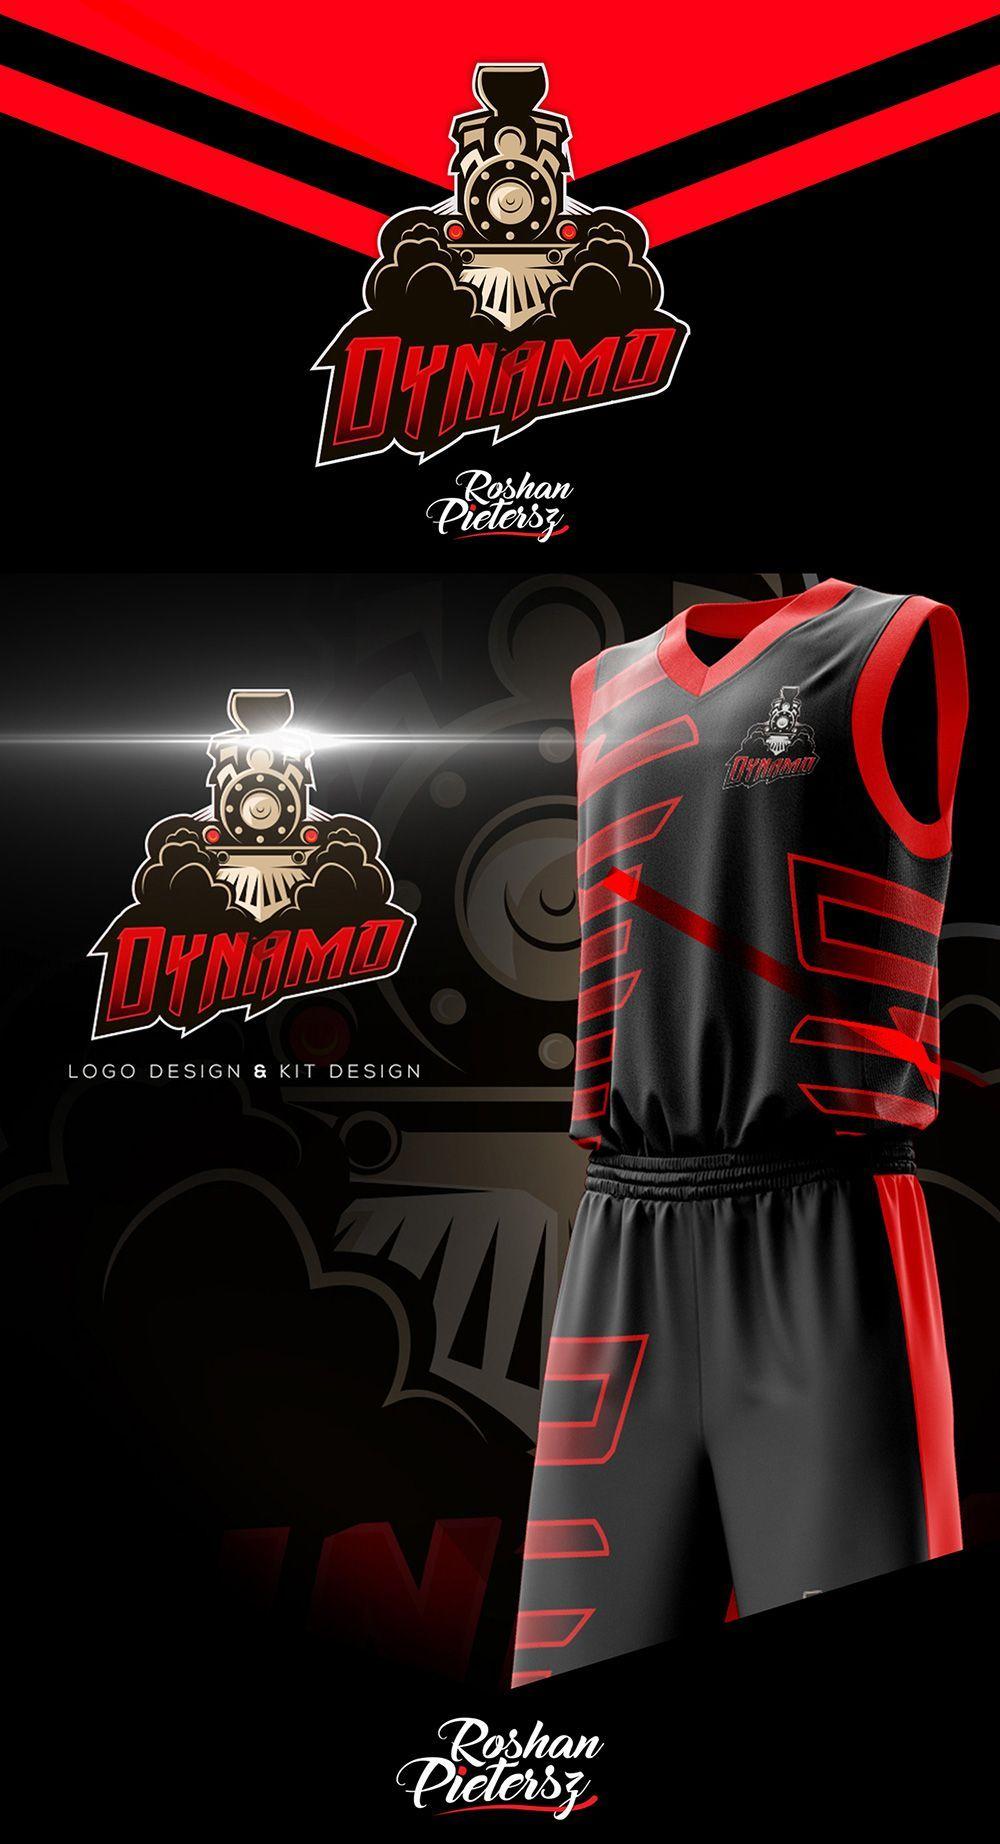 Basketball Graphic Design Logo - Awesome Basketball Team Logo and Identity Designs. Graphic